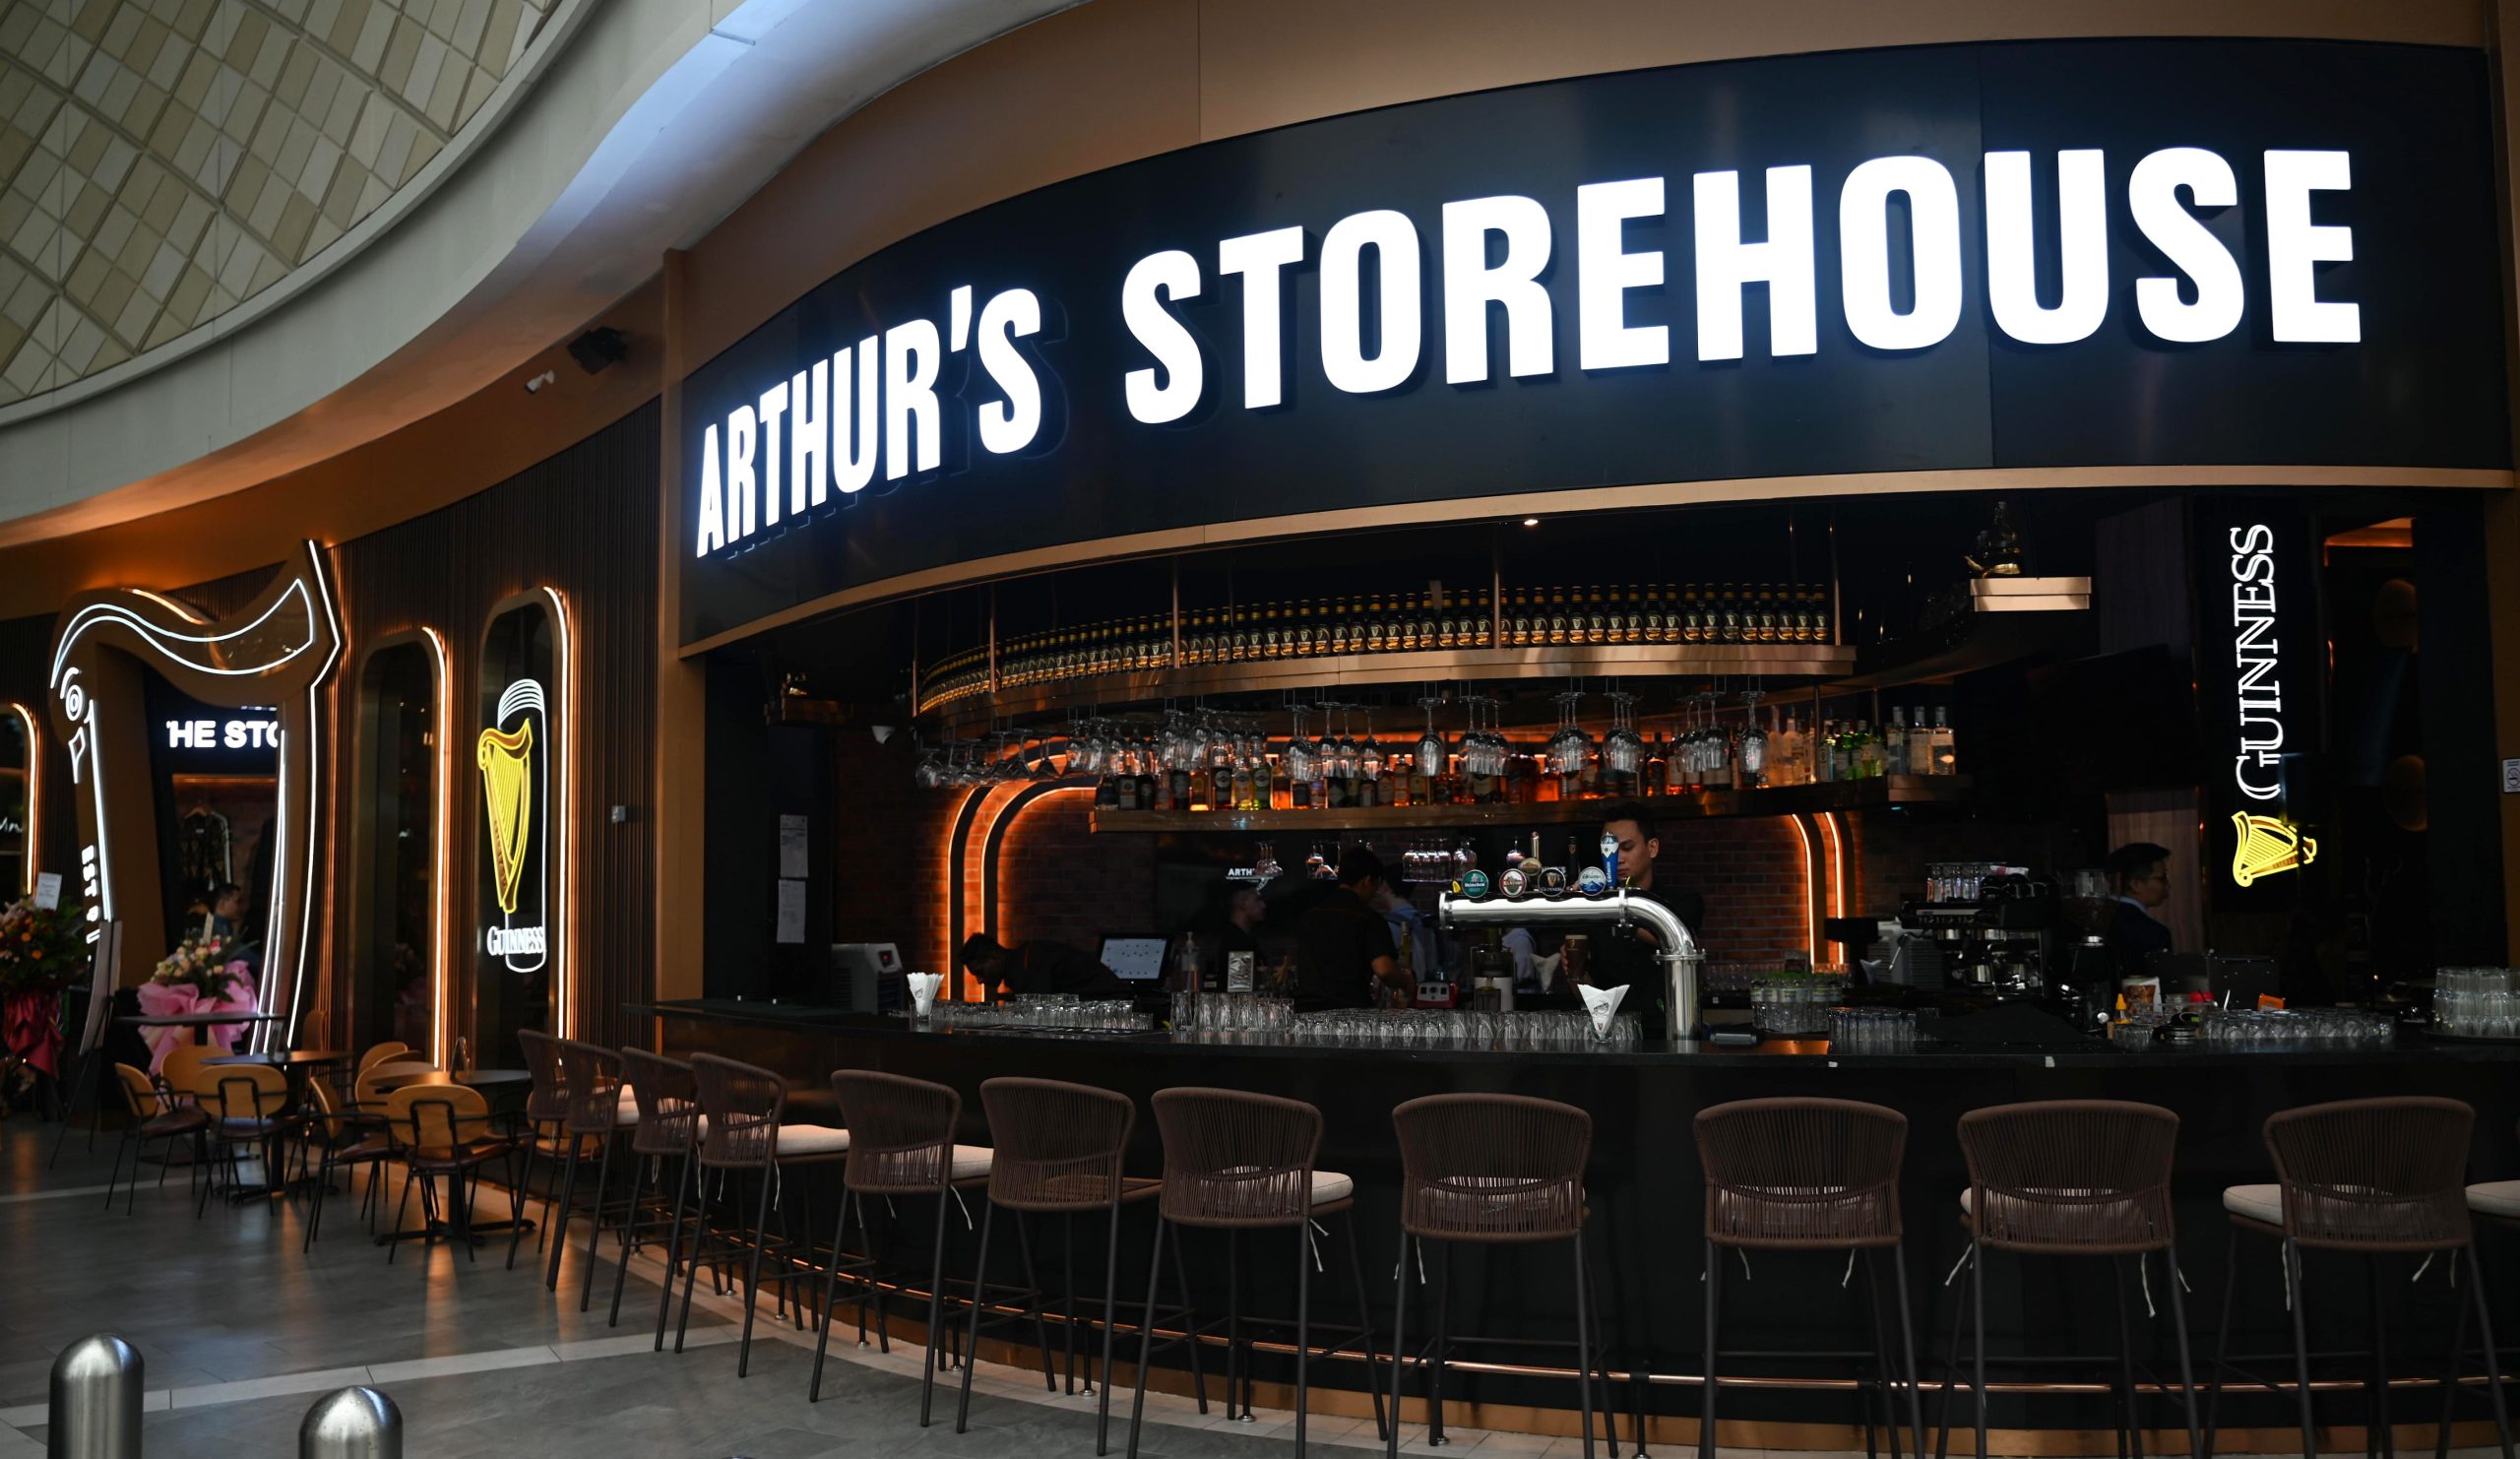 Second Arthur’s Storehouse Outlet Launches at Pavilion Bukit Jalil: A Blend of Iconic Guinness Heritage and Local Flavours